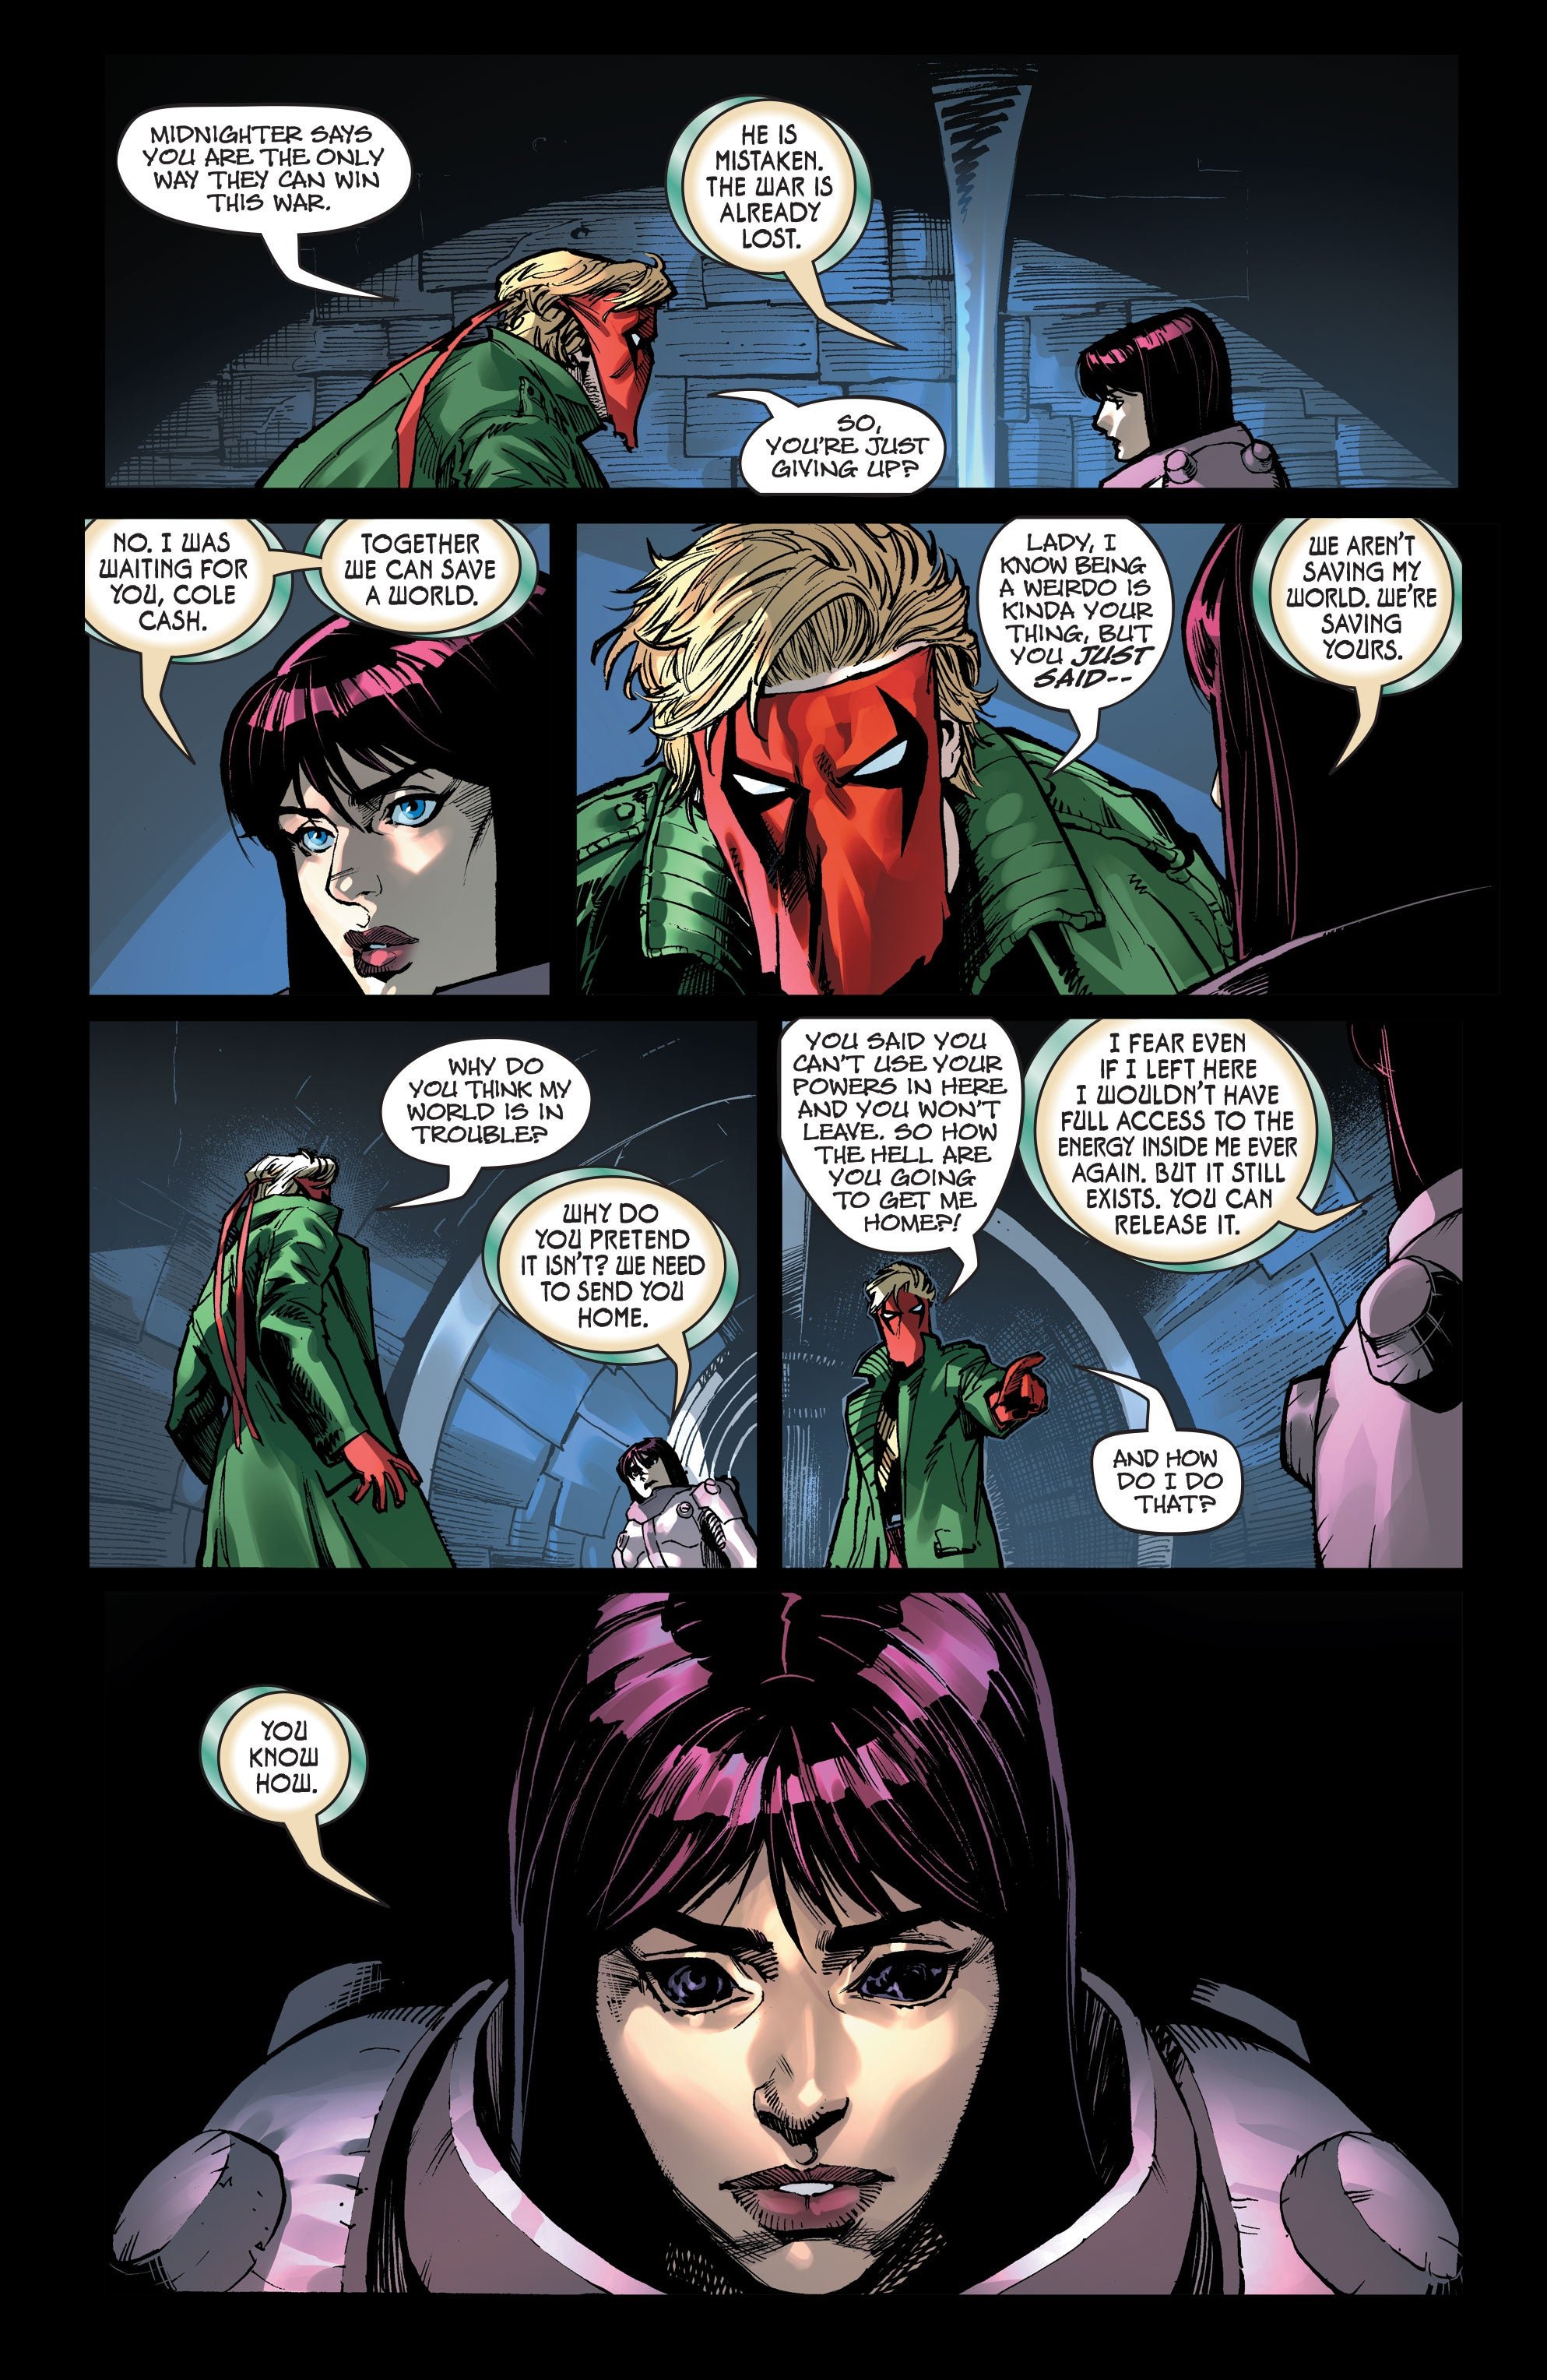 Void tells Grifter to kill her